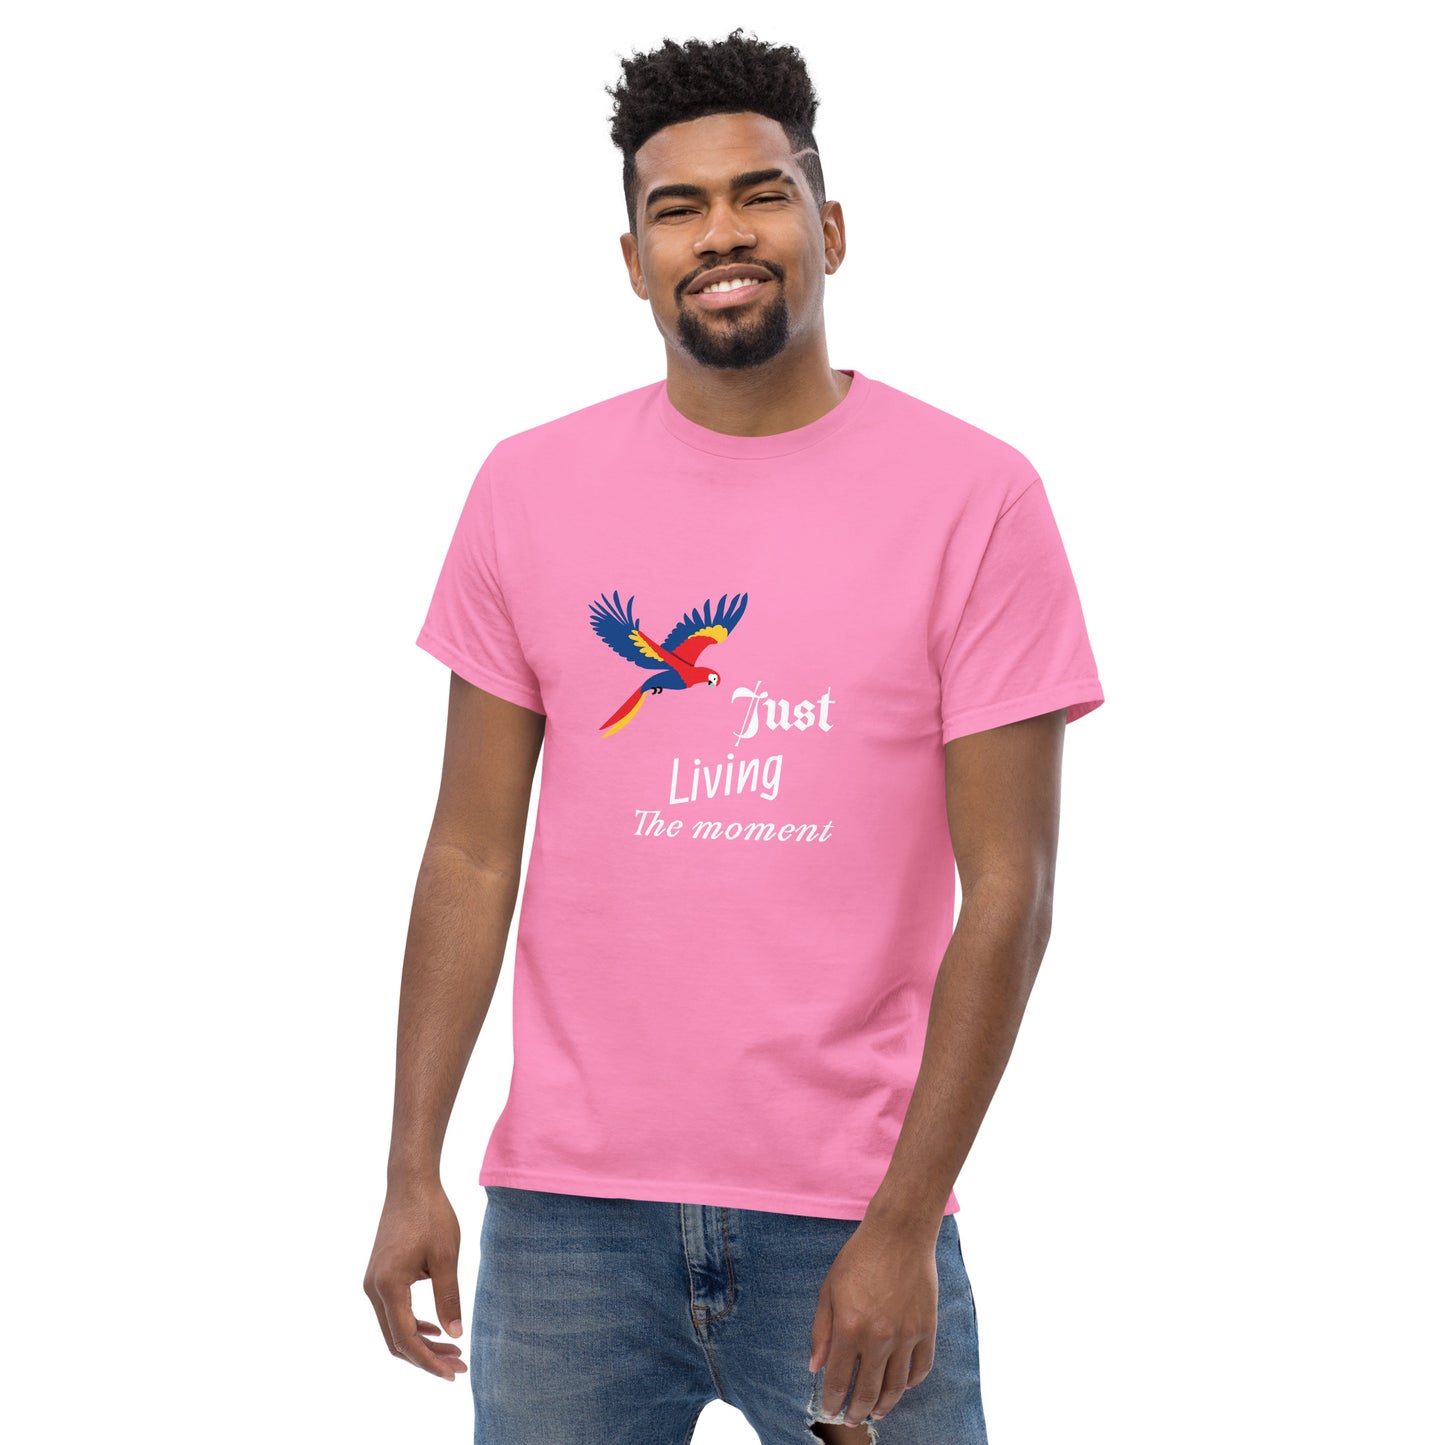 Inspirational Men's Tee, "Just Living The Moment", Fashion With Meaning